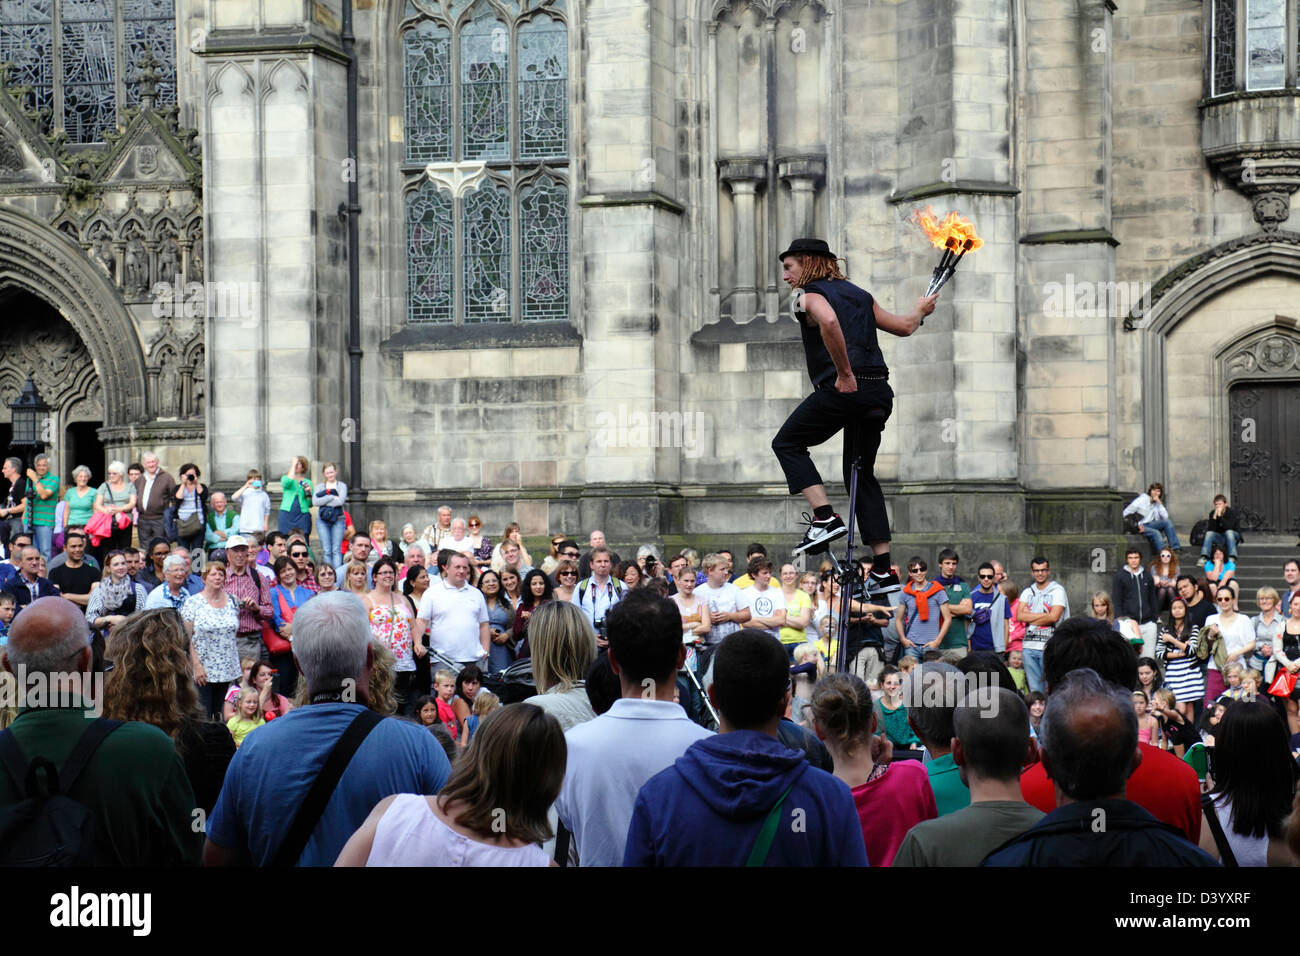 Edinburgh Festival Fringe street performer Damien Ryan, Deadly Serious, entertaining a crowd juggling with fire on a uni cycle, Scotland, UK Stock Photo